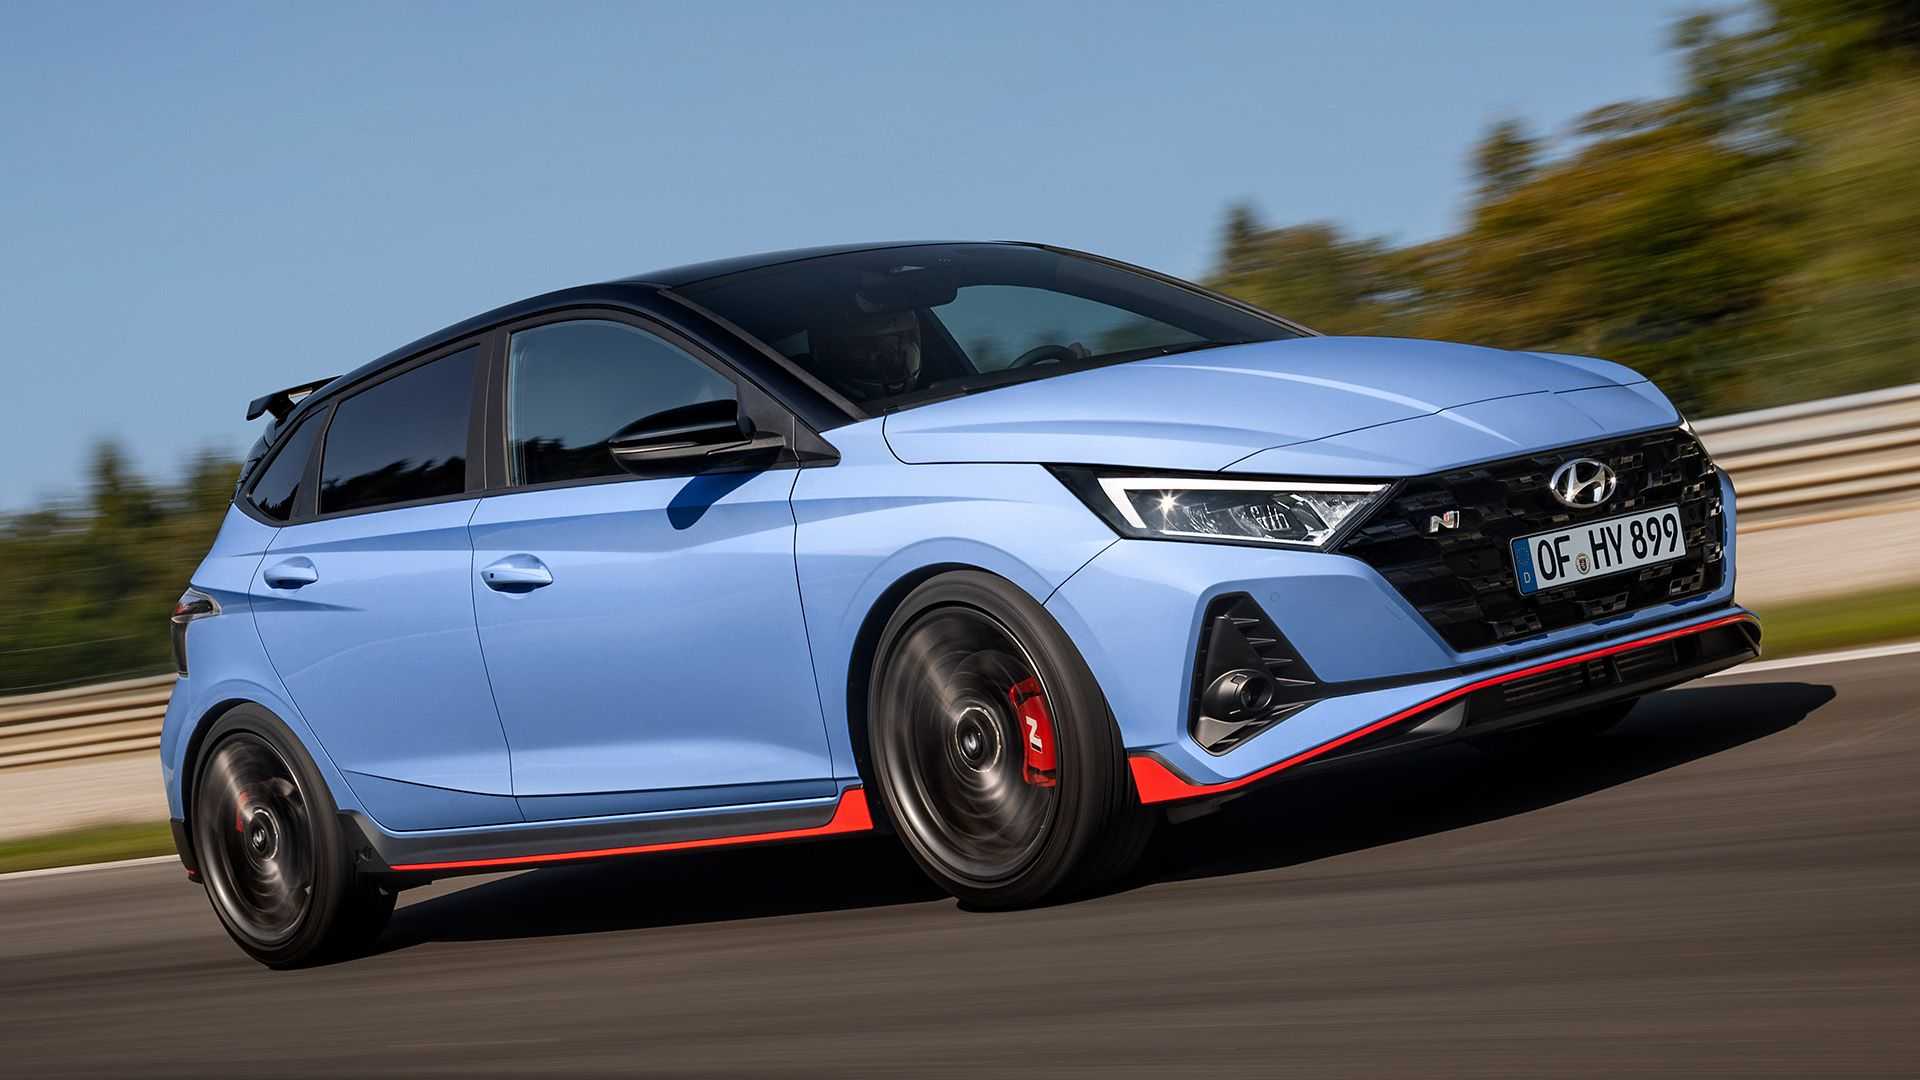 winnen oogsten slang New Addition to the “Gamma,” 2021 Hyundai i20 N Reaches Over 200 hp and 230  kph - autoevolution